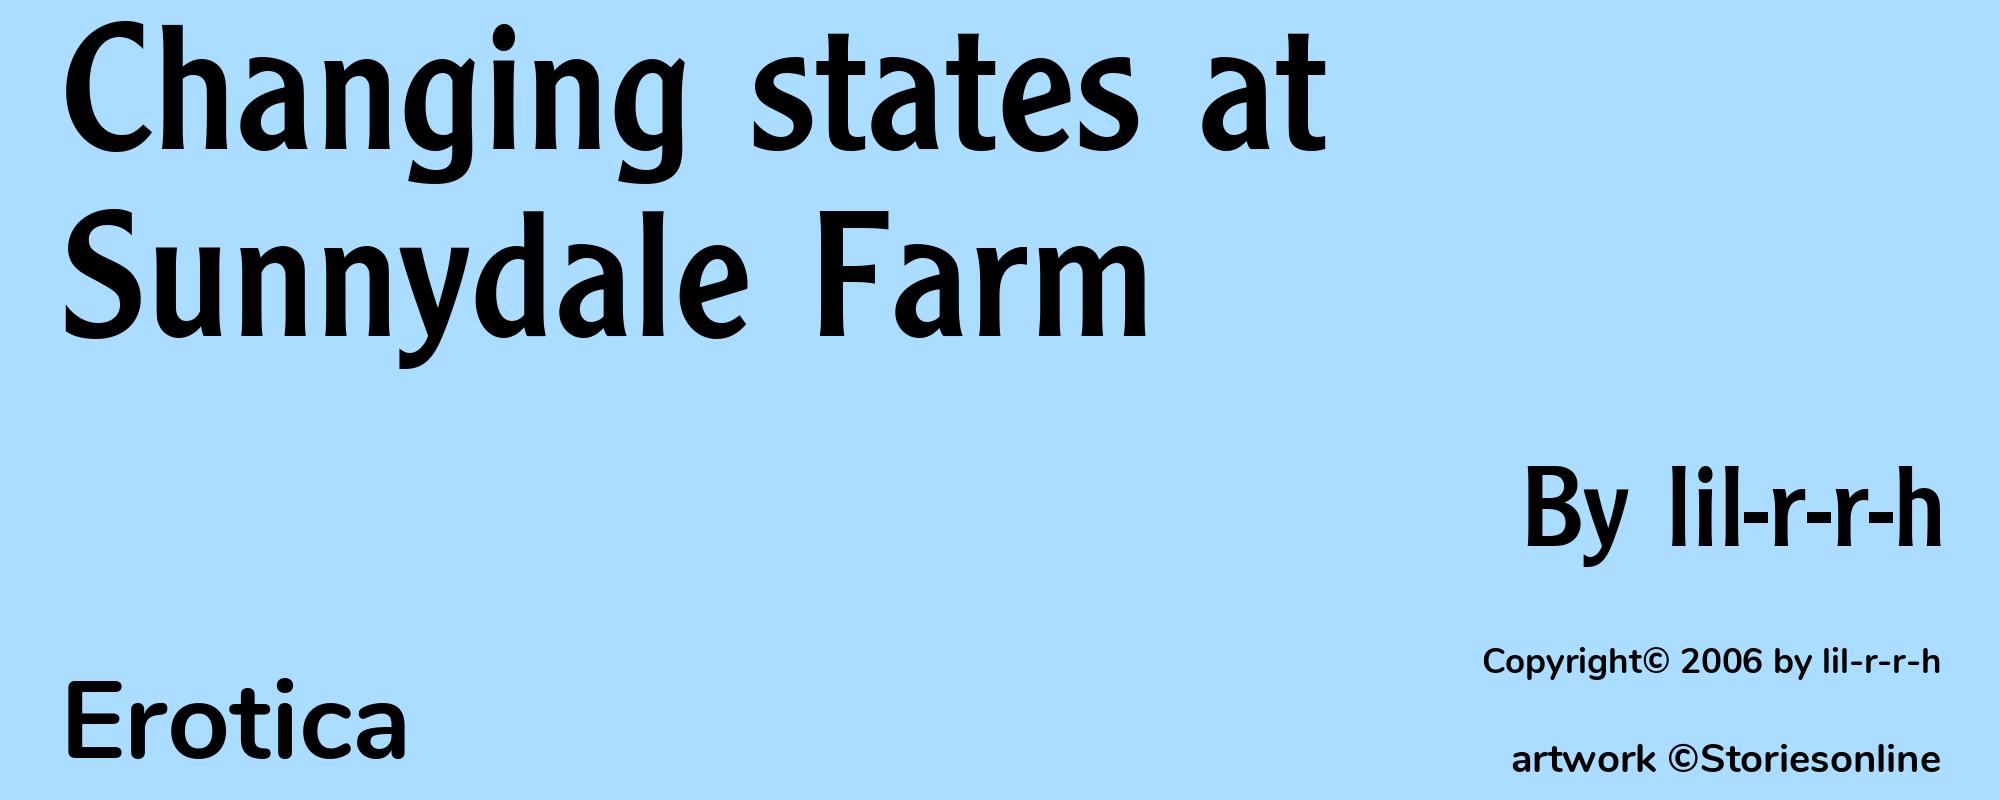 Changing states at Sunnydale Farm - Cover